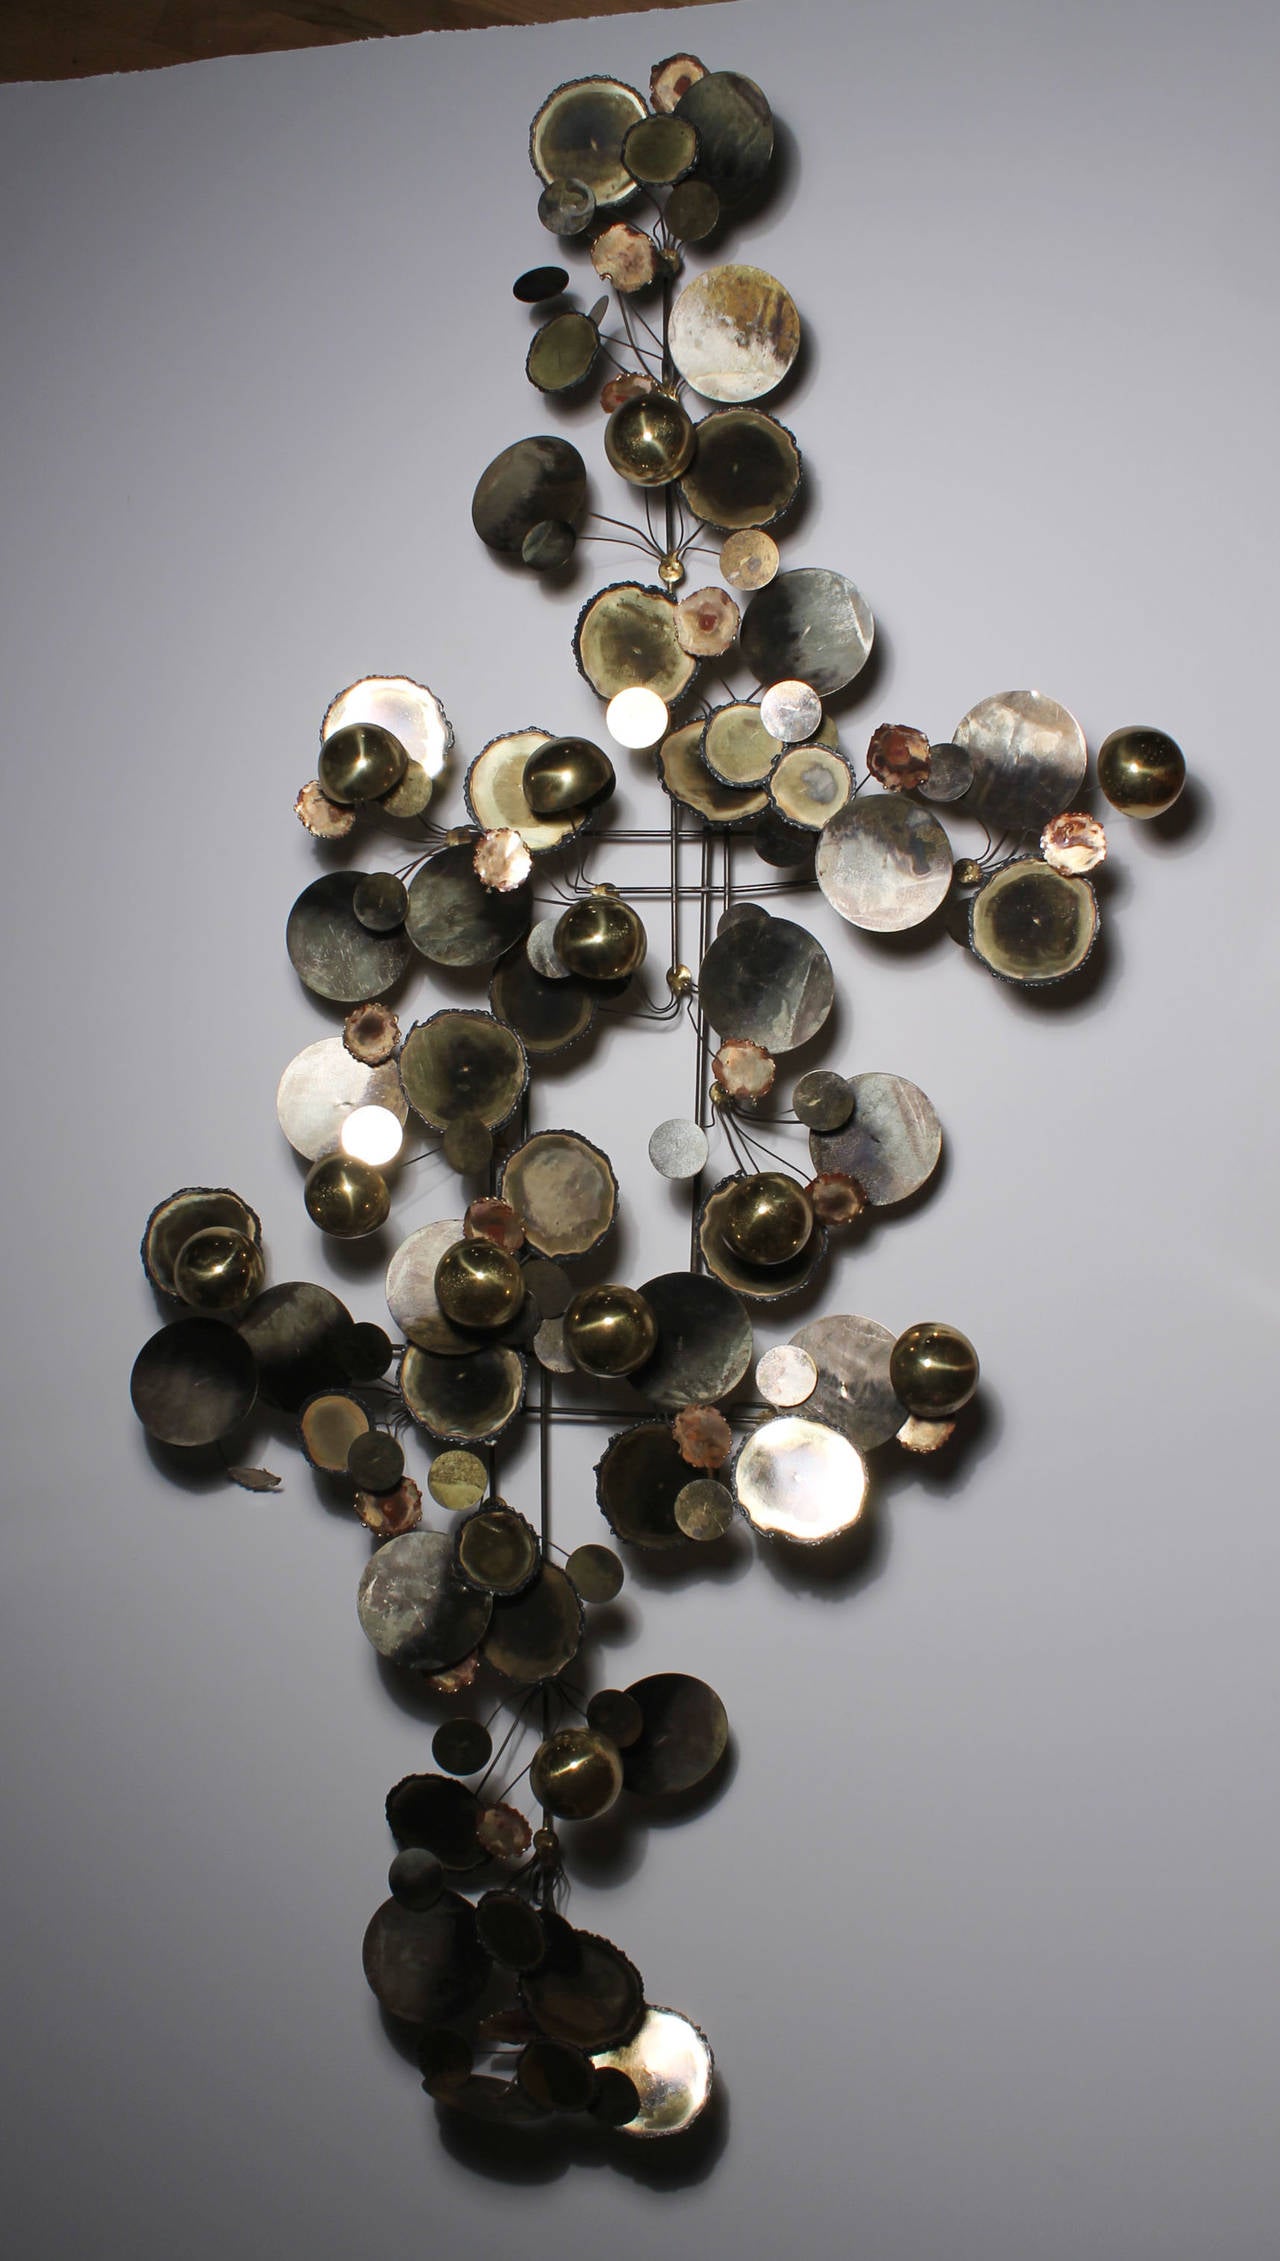 Large Curtis Jere MIxed Metals Raindrops Sculpture. 

can be mounted either vertically (as shown) or horizontally.

about 58